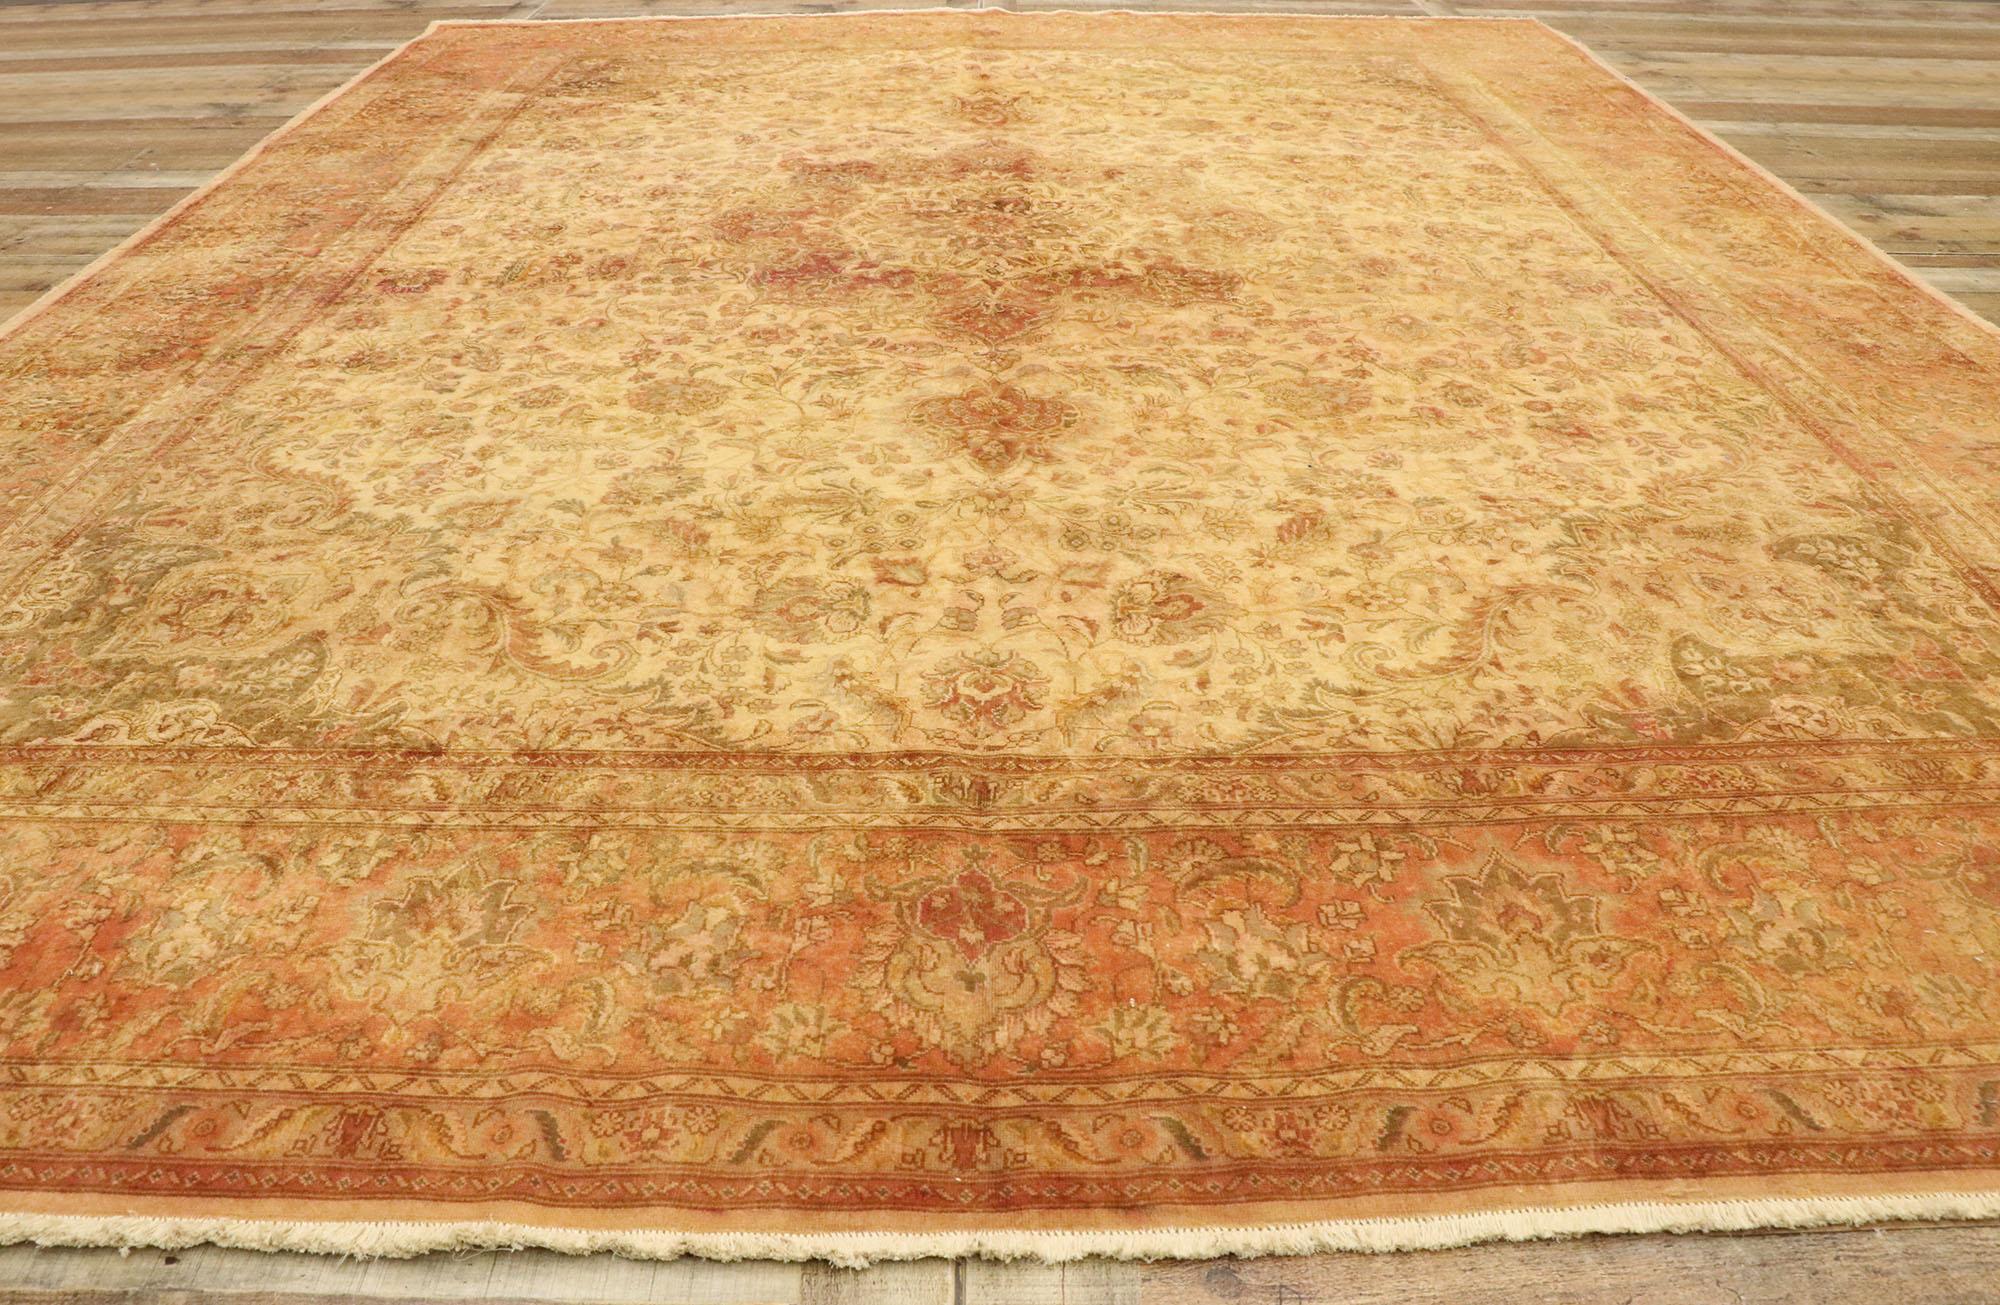 Vintage Persian Tabriz Rug with Rustic Mediterranean Tuscan Style In Good Condition For Sale In Dallas, TX